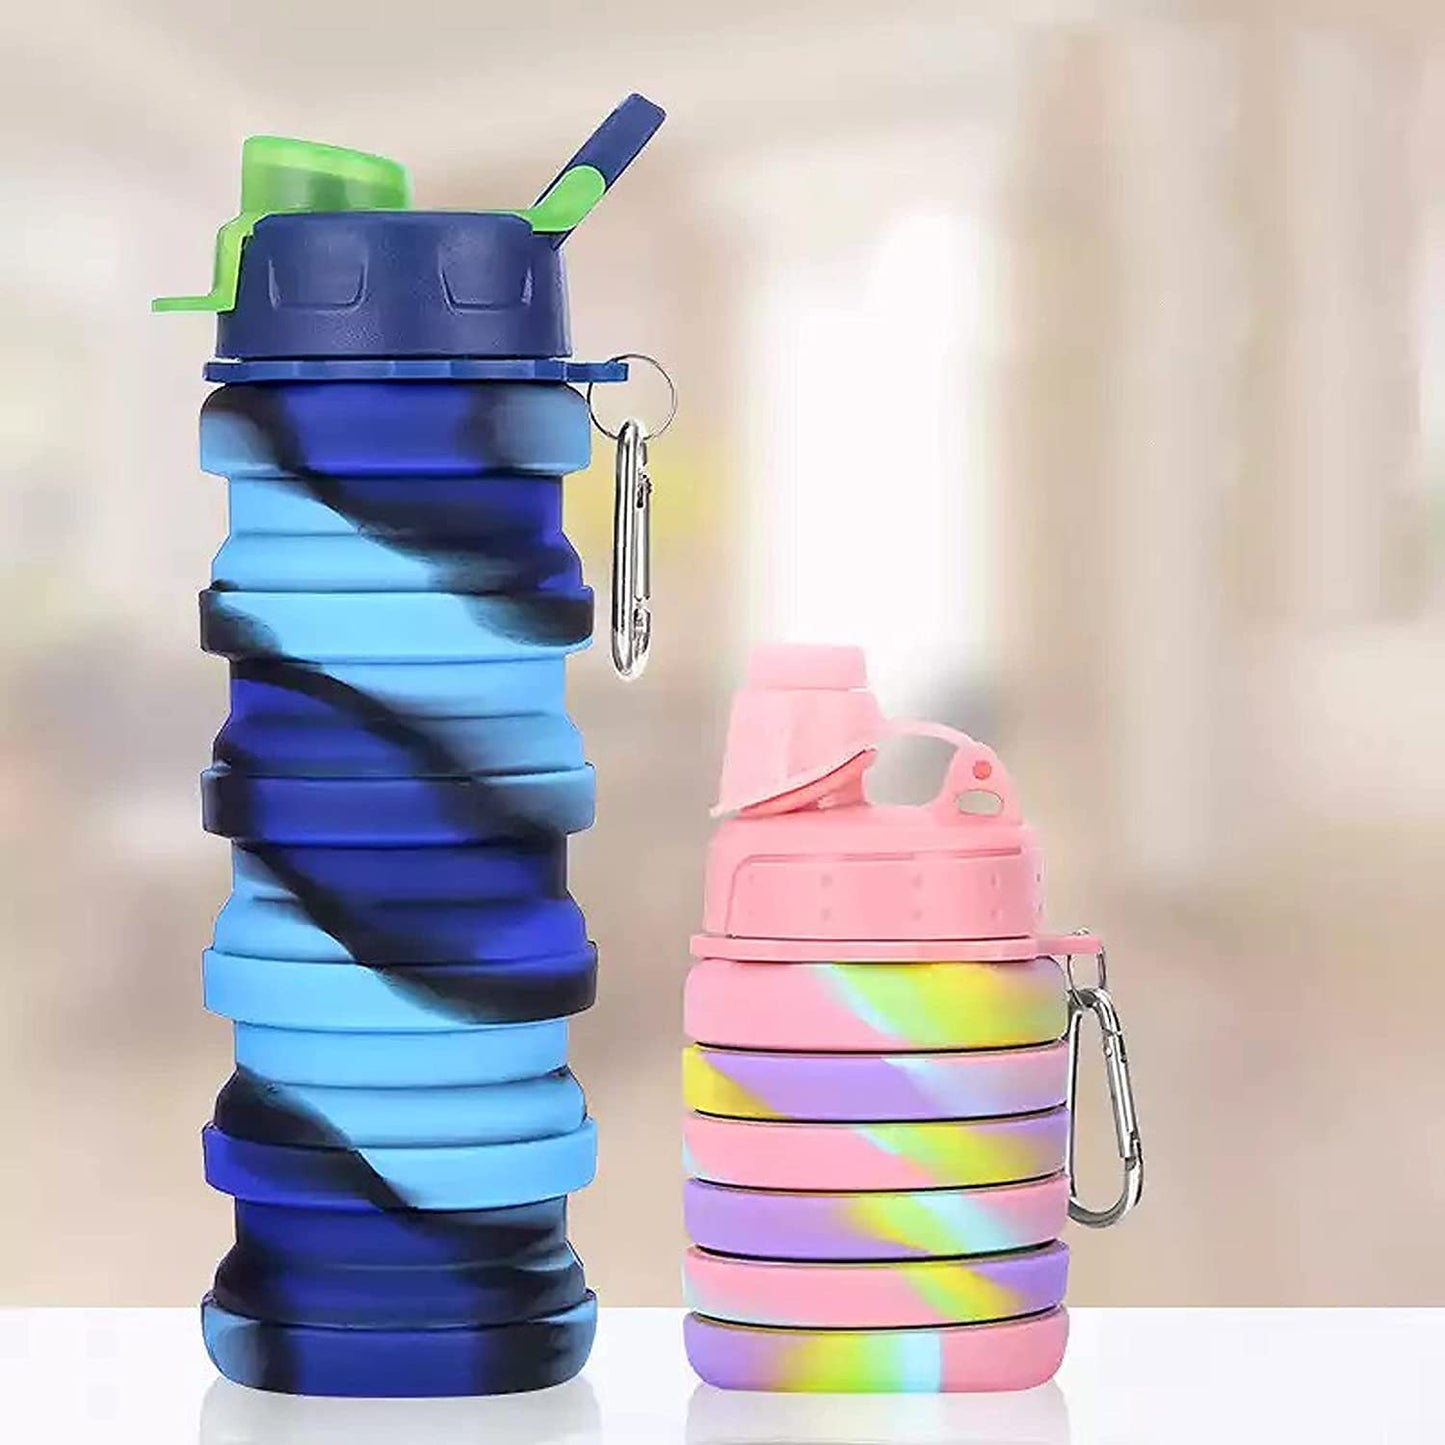 Collapsible Water Bottle, Bpa Free Silicone Foldable Water Bottles, Gym Camping Hiking, Portable Leak Proof Sports Water Bottle